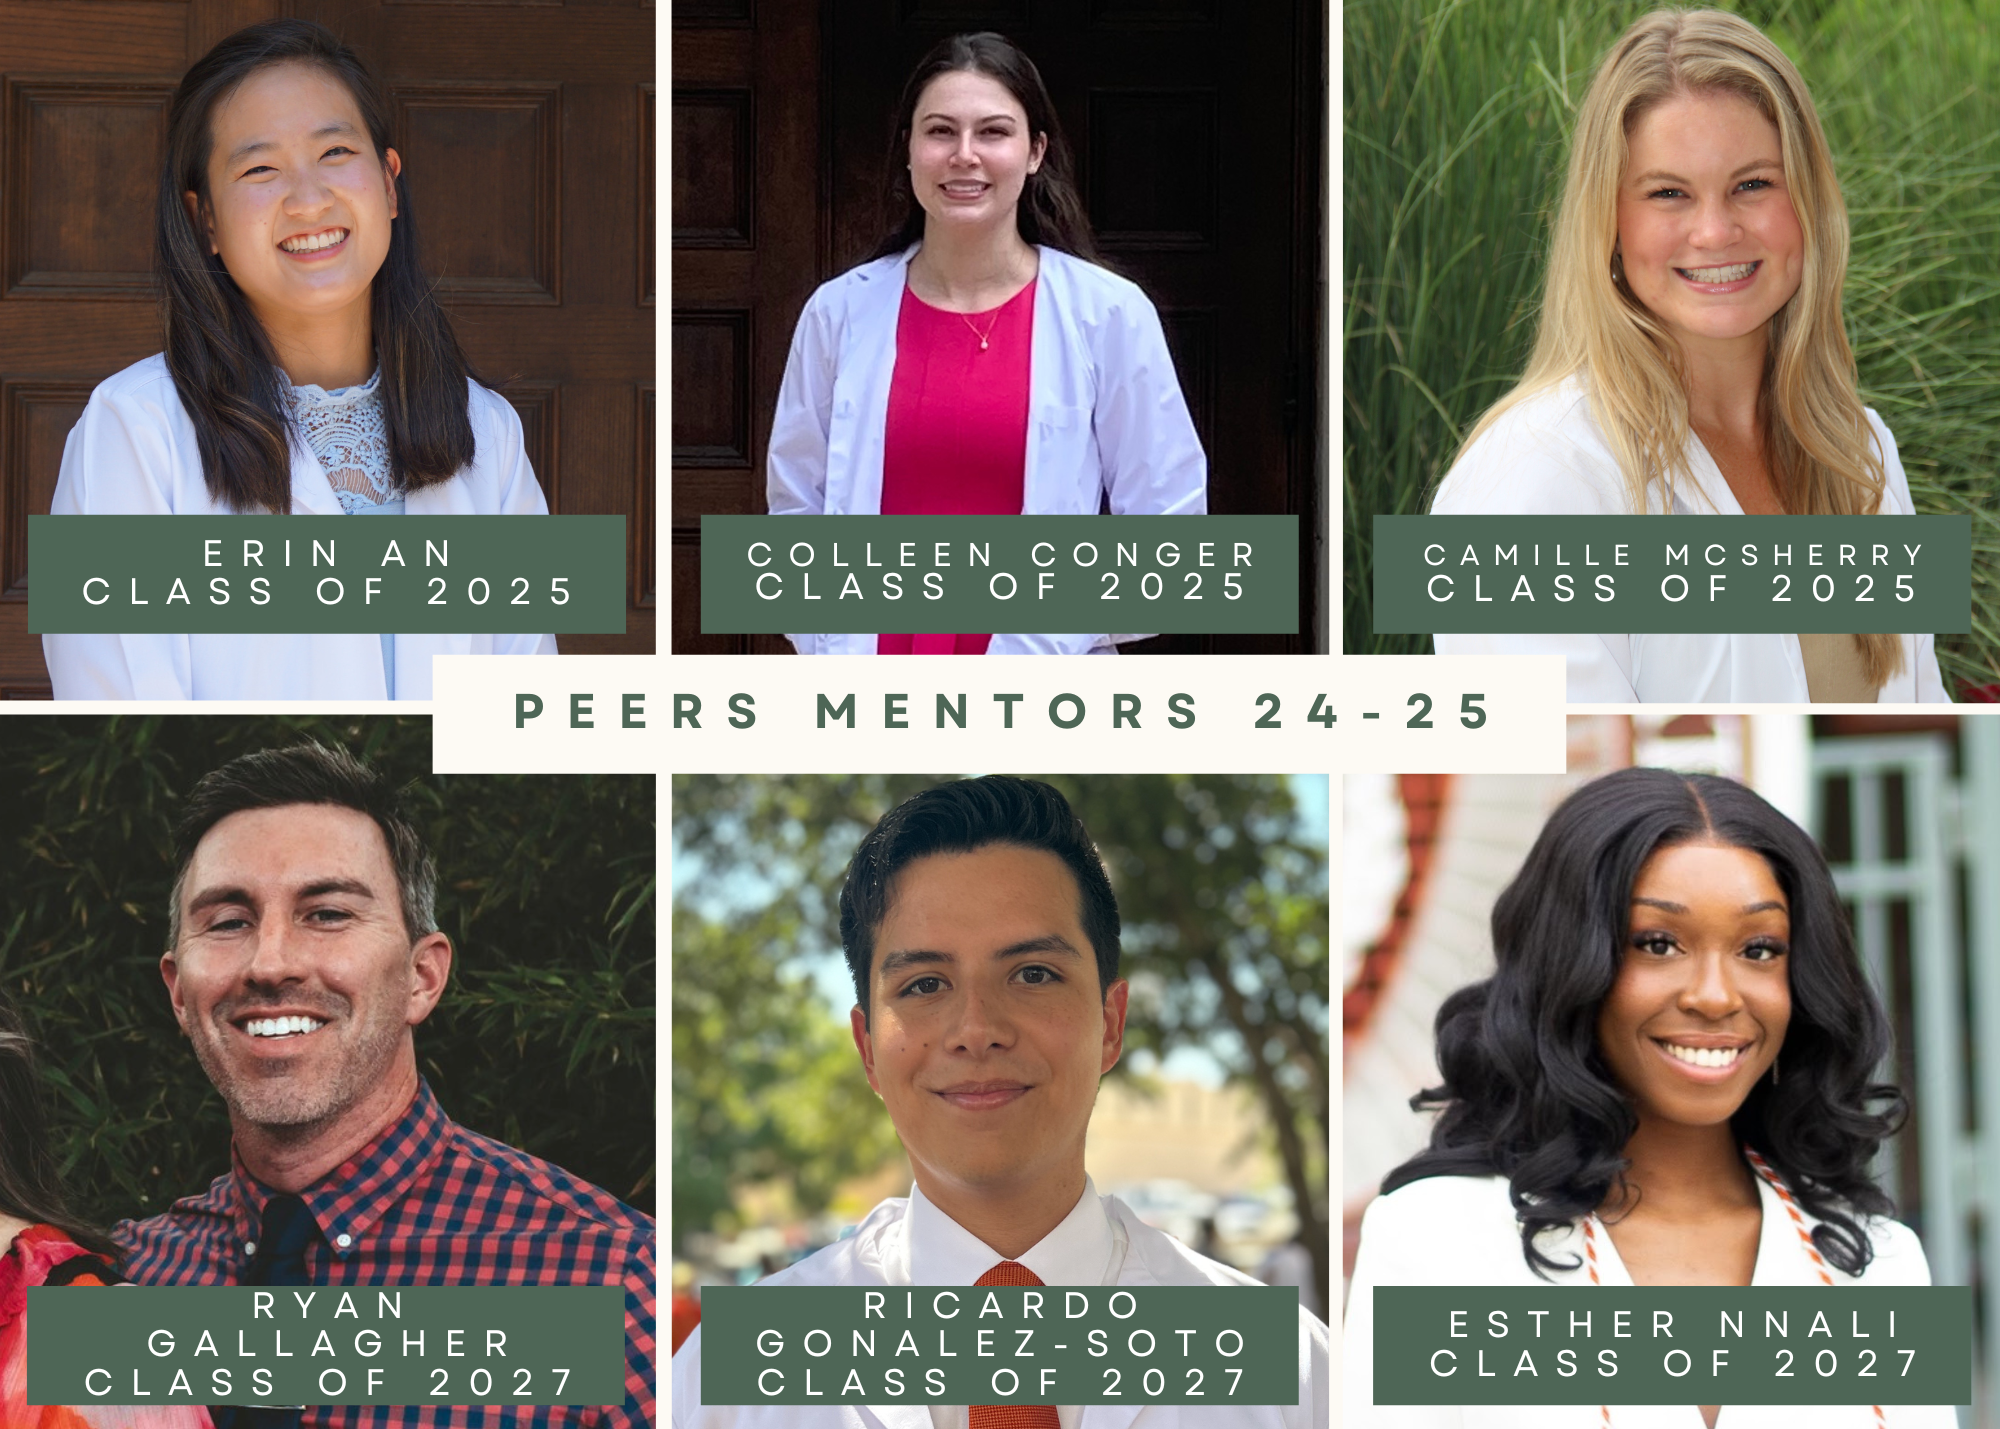 Pictures and names of PEERS mentors for 2024-25.